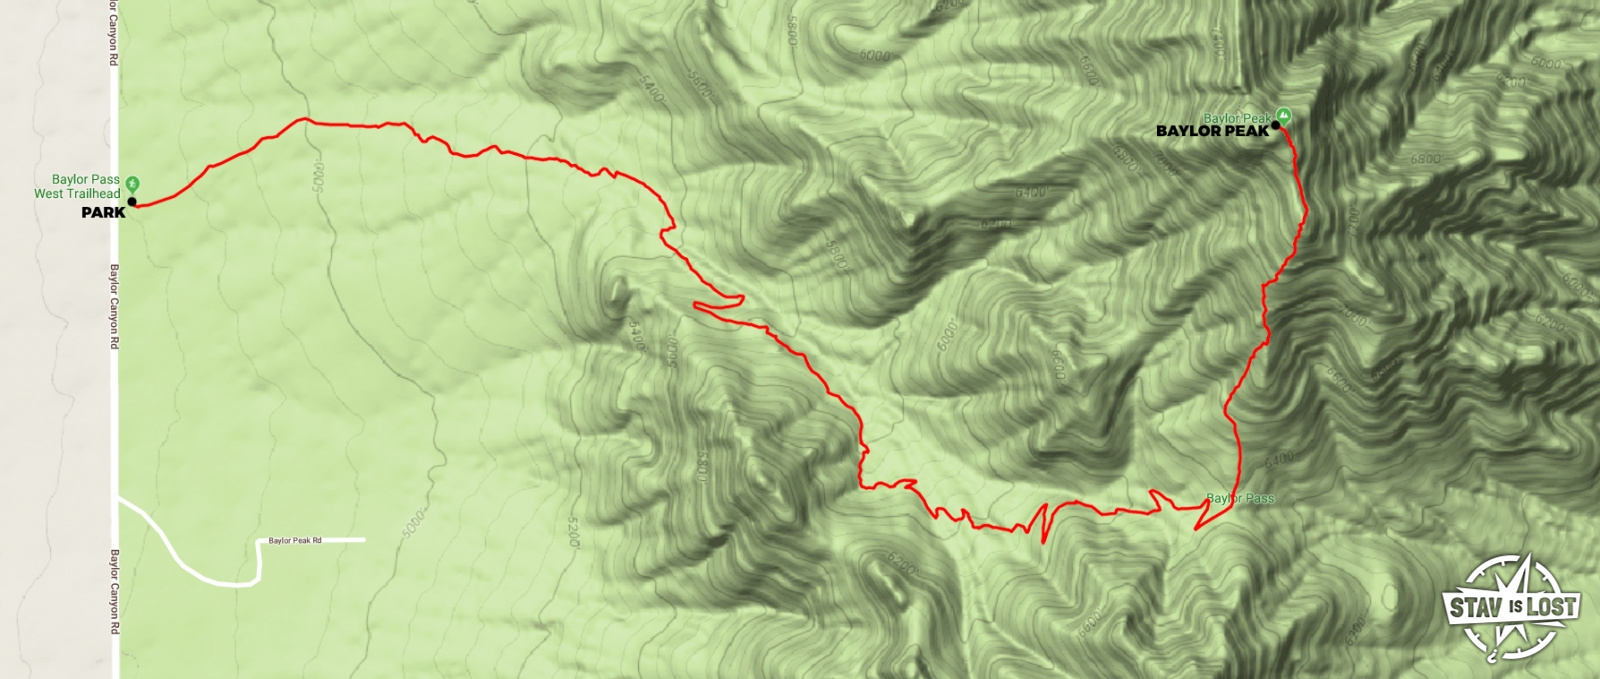 map for Baylor Peak via Baylor Pass West by stav is lost